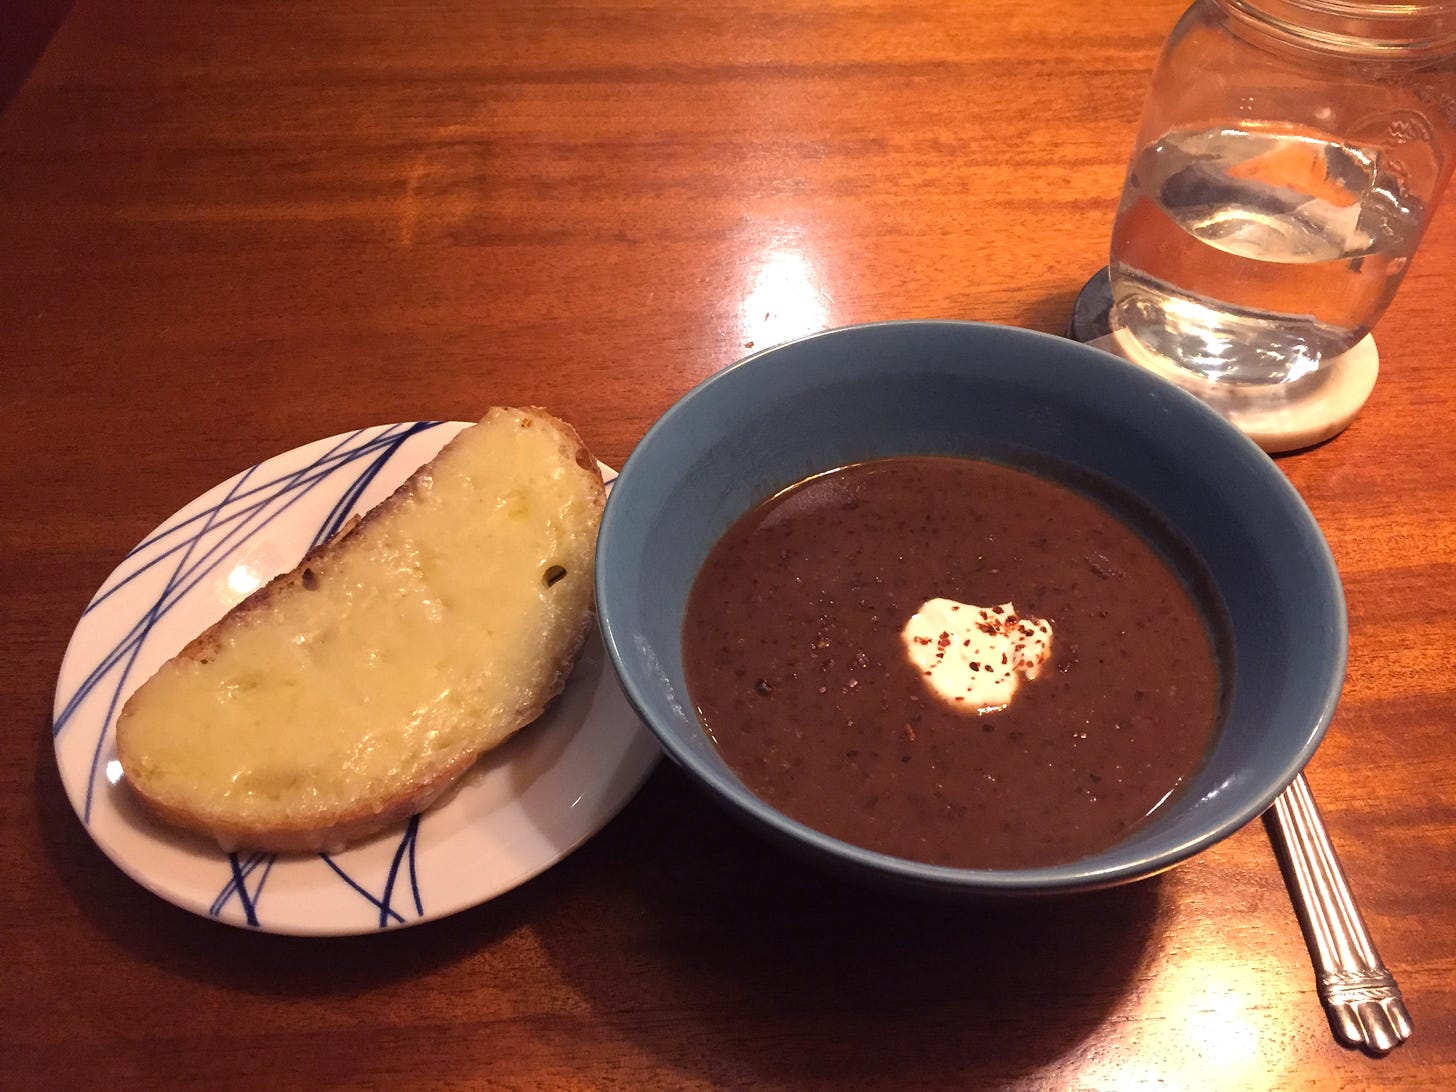 A blue bowl of black bean soup, with chili flakes and a dollop of crema. On a small plate next to it is a slice of sourdough covered in melted white cheddar.